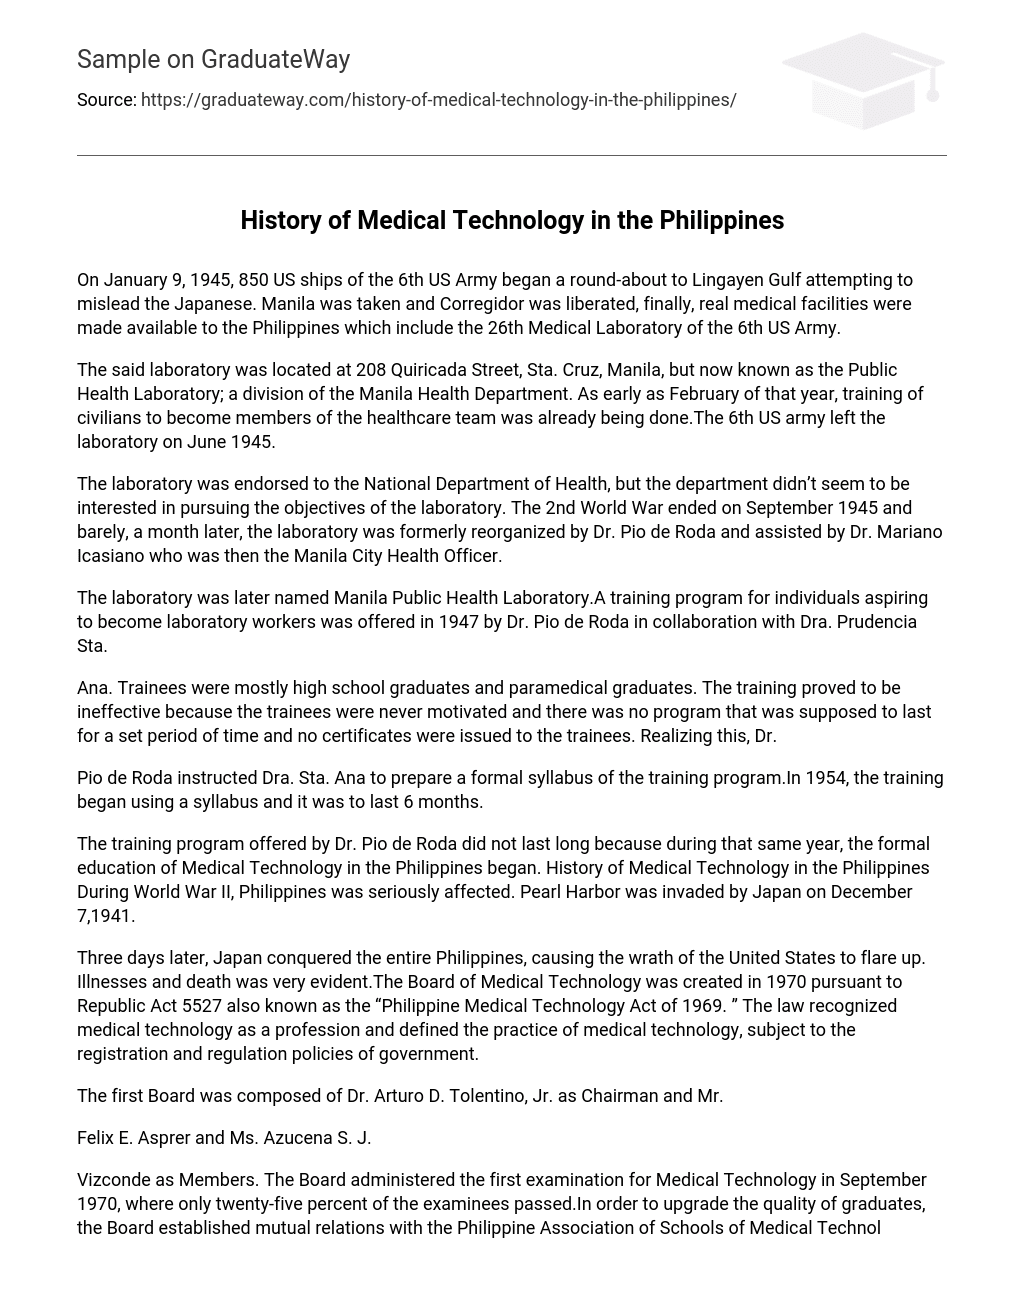 History of Medical Technology in the Philippines